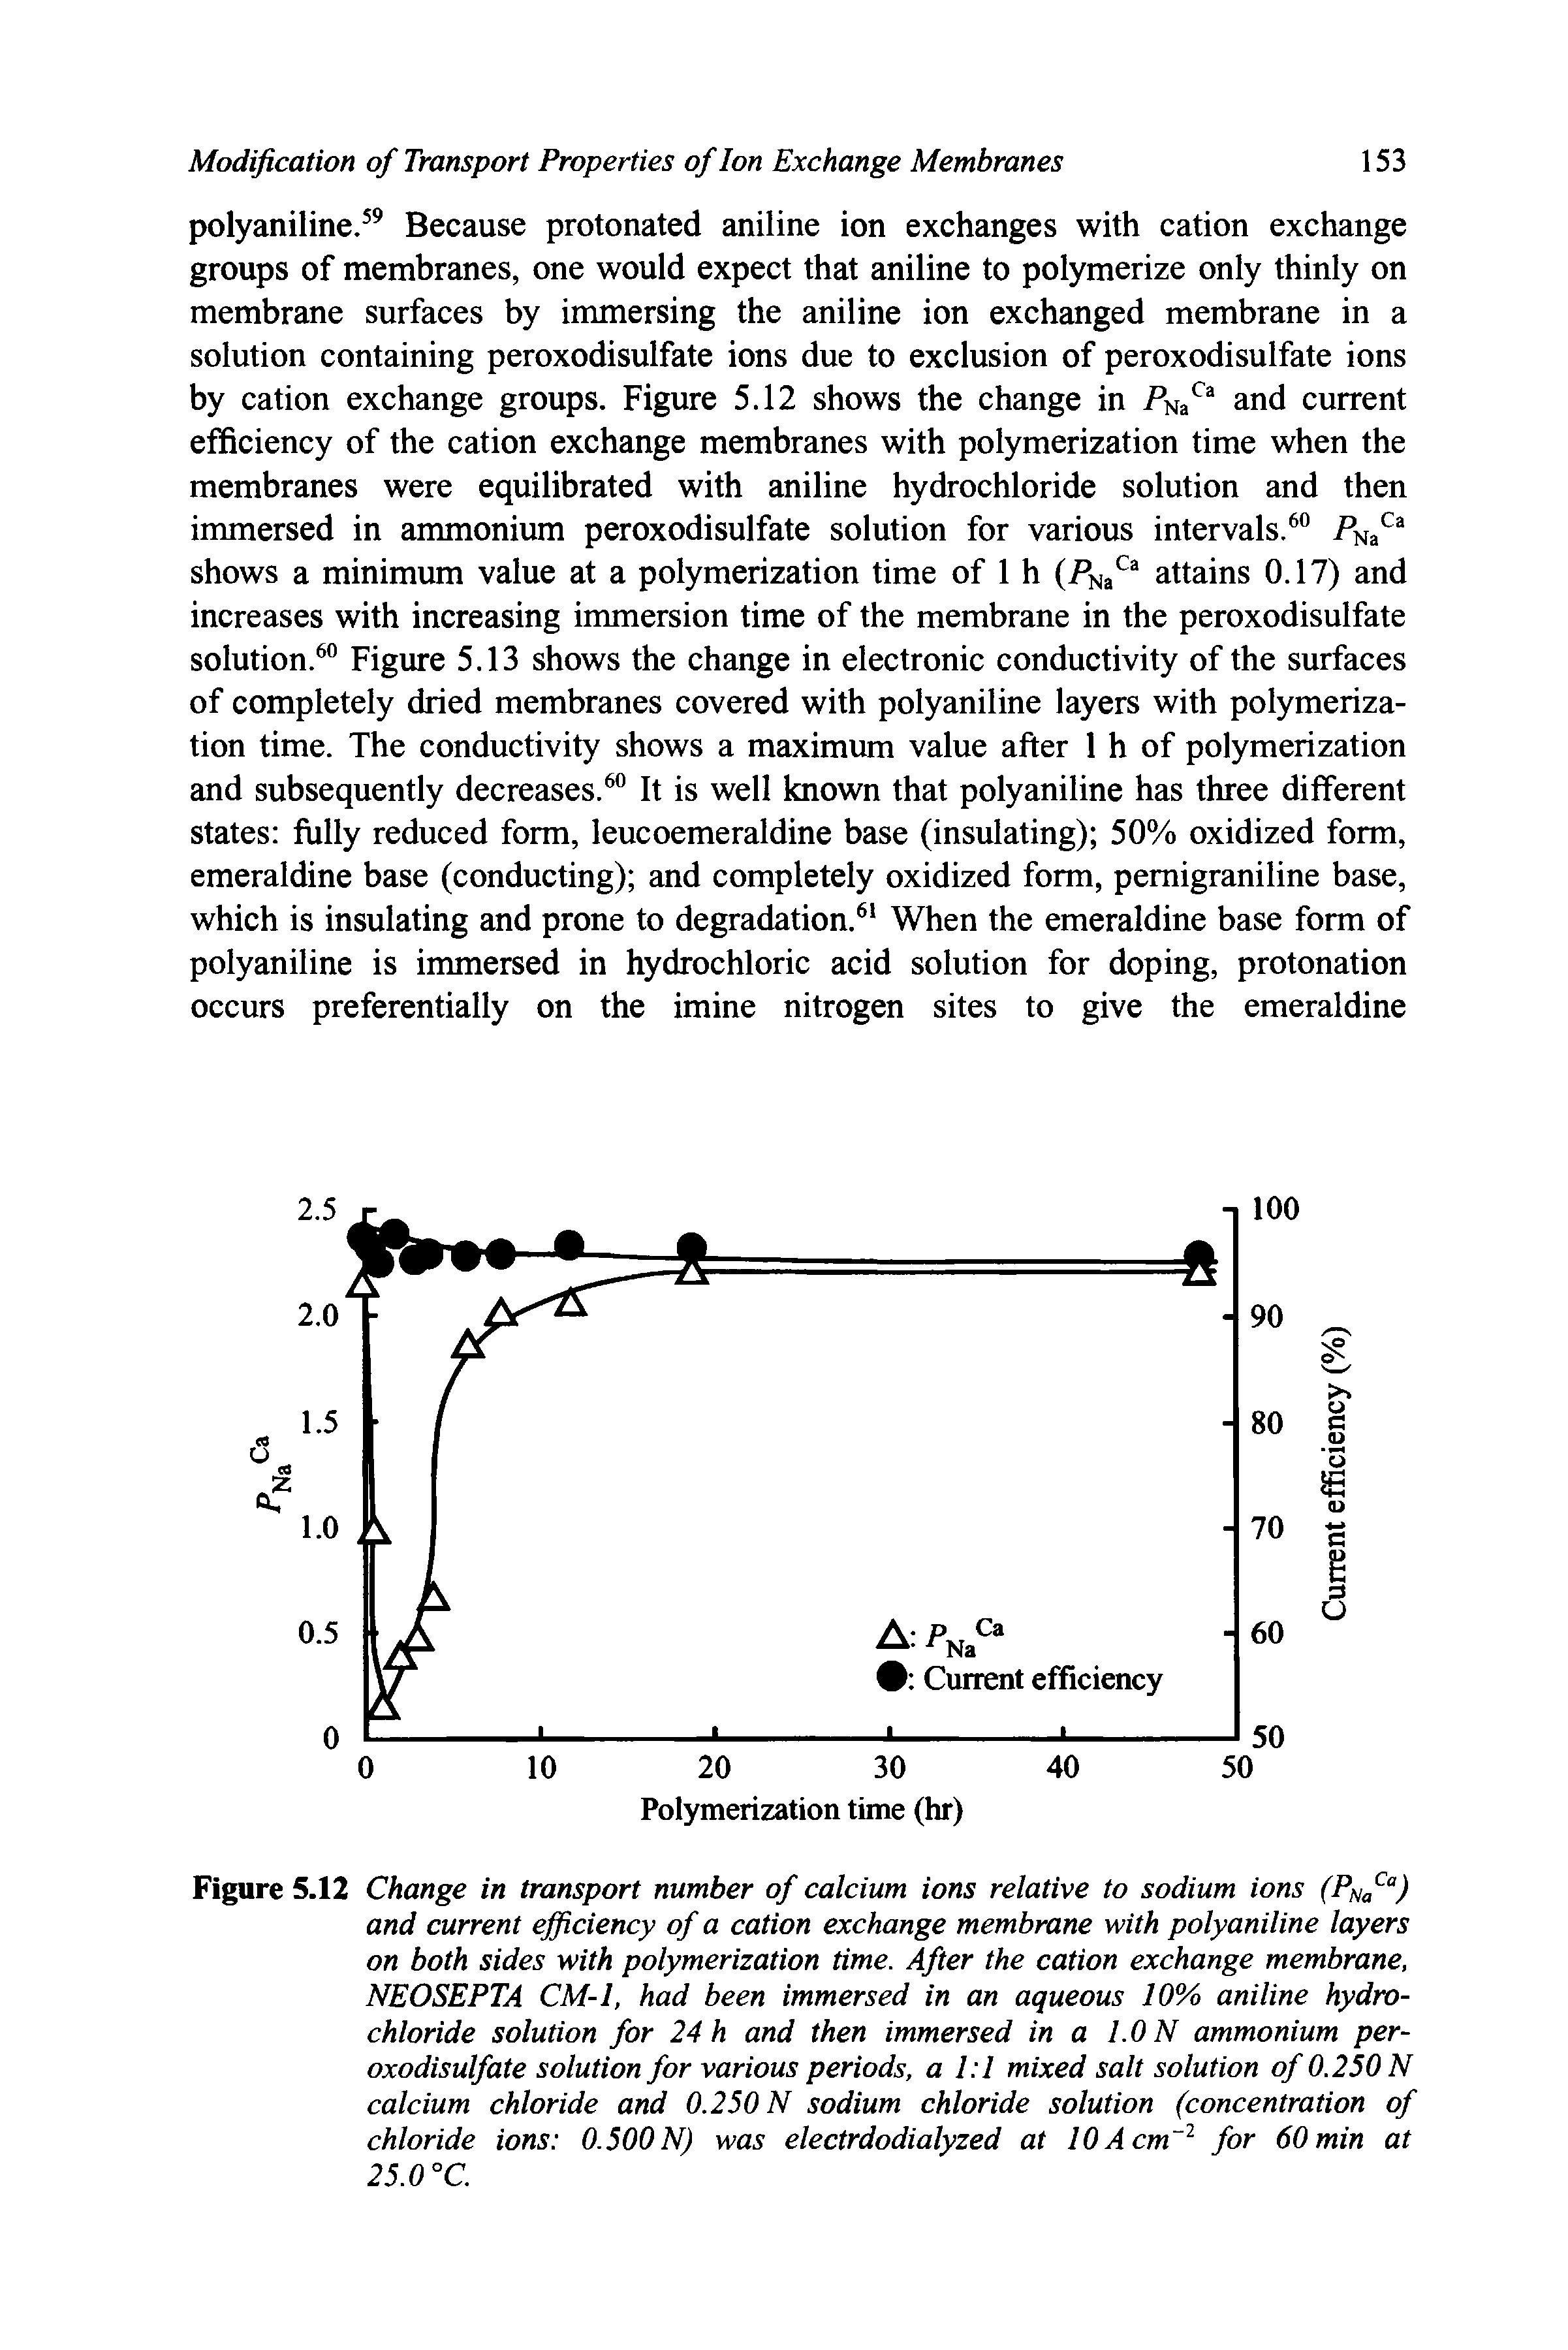 Figure 5.12 Change in transport number of calcium ions relative to sodium ions (PNaCa) and current efficiency of a cation exchange membrane with polyaniline layers on both sides with polymerization time. After the cation exchange membrane, NEOSEPTA CM-1, had been immersed in an aqueous 10% aniline hydrochloride solution for 24 h and then immersed in a 1.0 N ammonium peroxodisulfate solution for various periods, a 1 1 mixed salt solution of 0.250 N calcium chloride and 0.250 N sodium chloride solution (concentration of chloride ions 0.500 N) was electrdodialyzed at 10Acm 2 for 60 min at 25.0 °C.